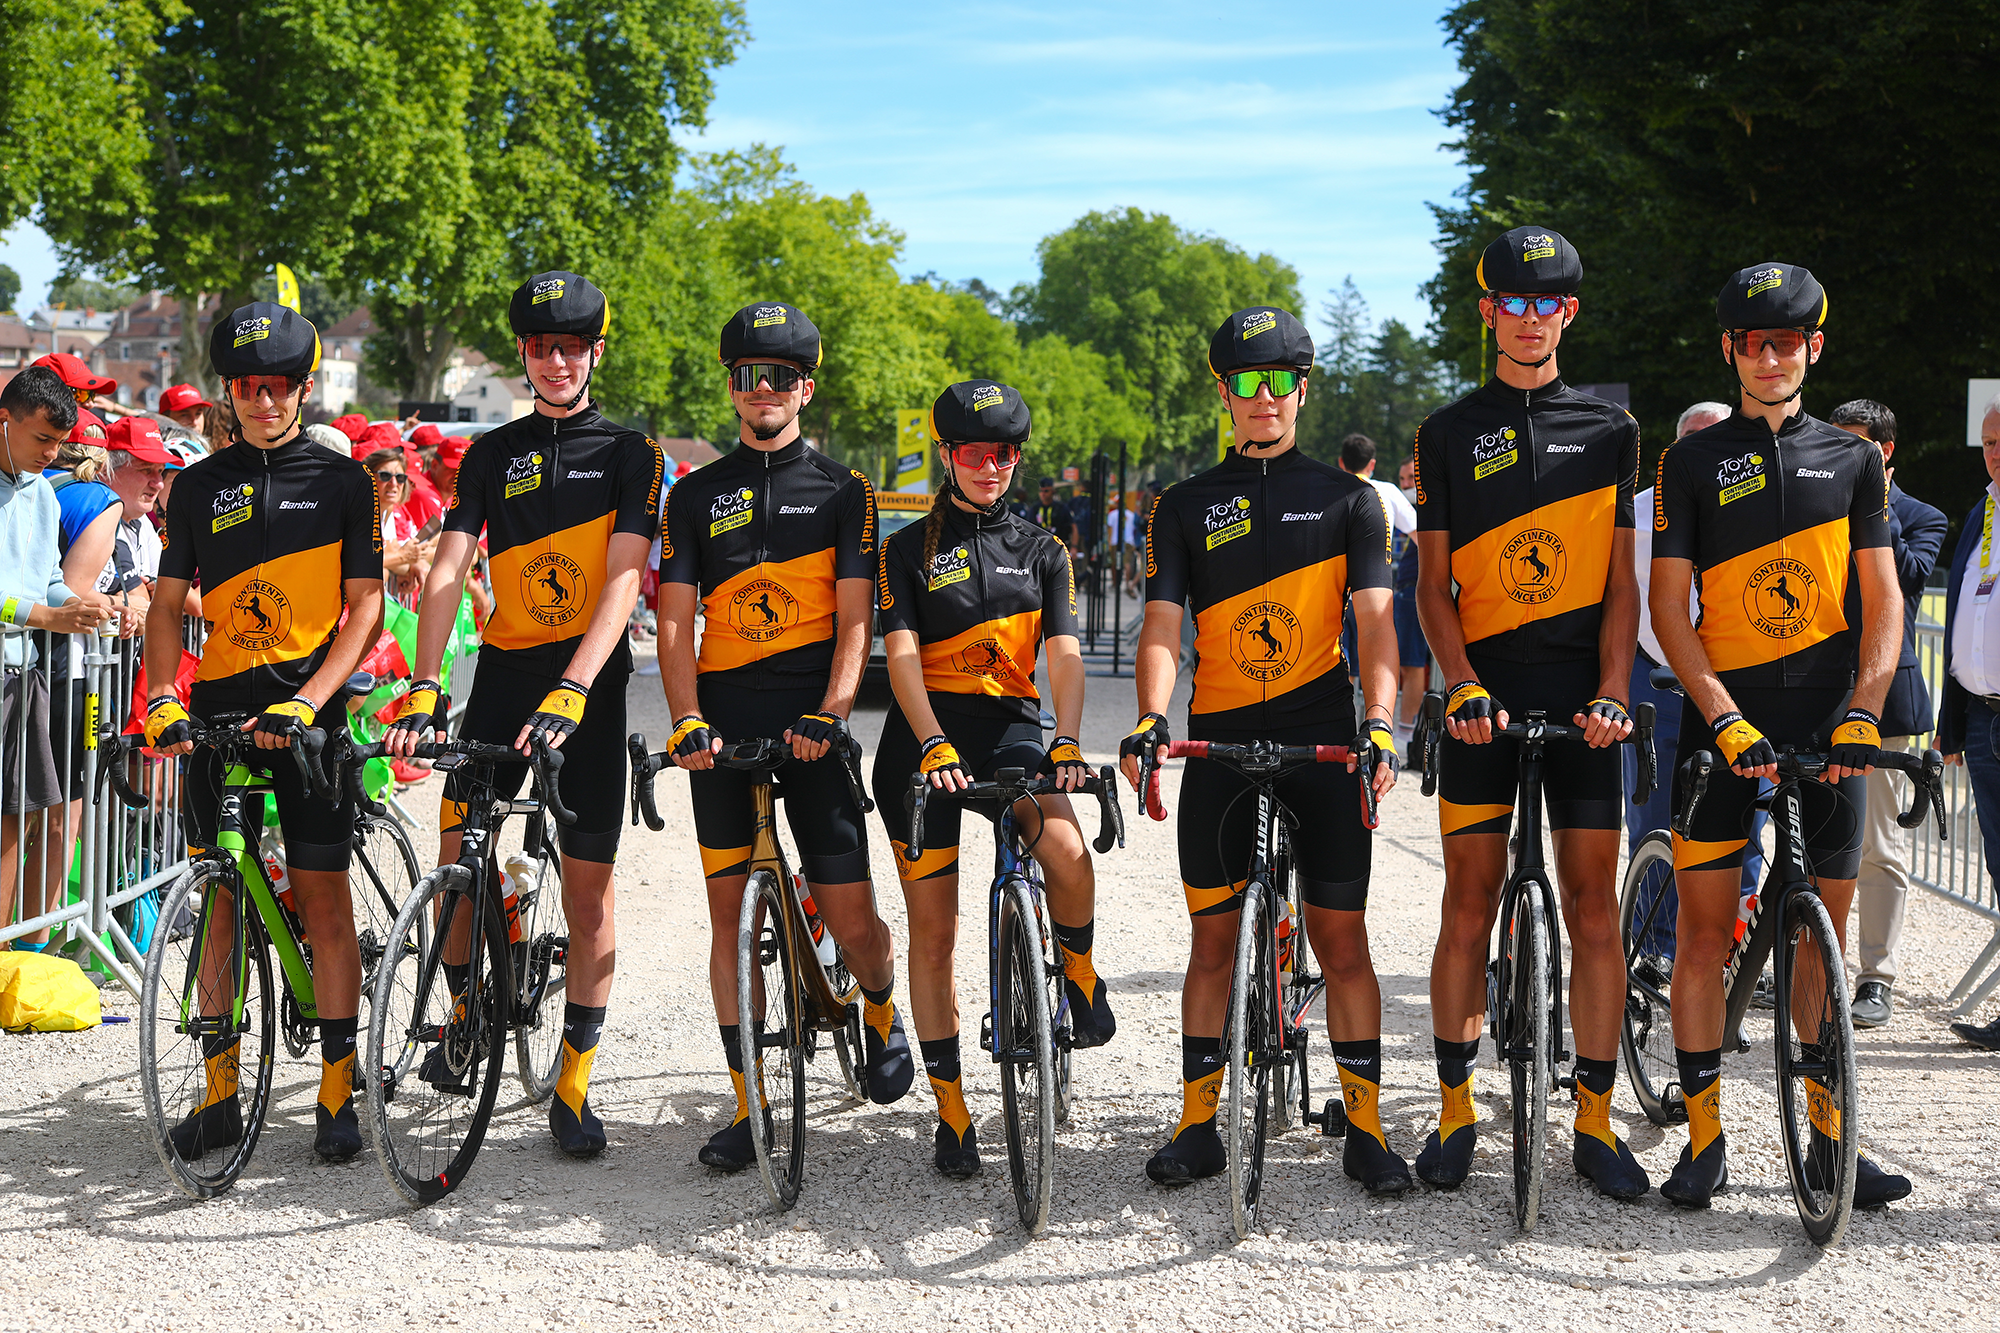 Young cadets about to ride one of the stages of the Tour de France